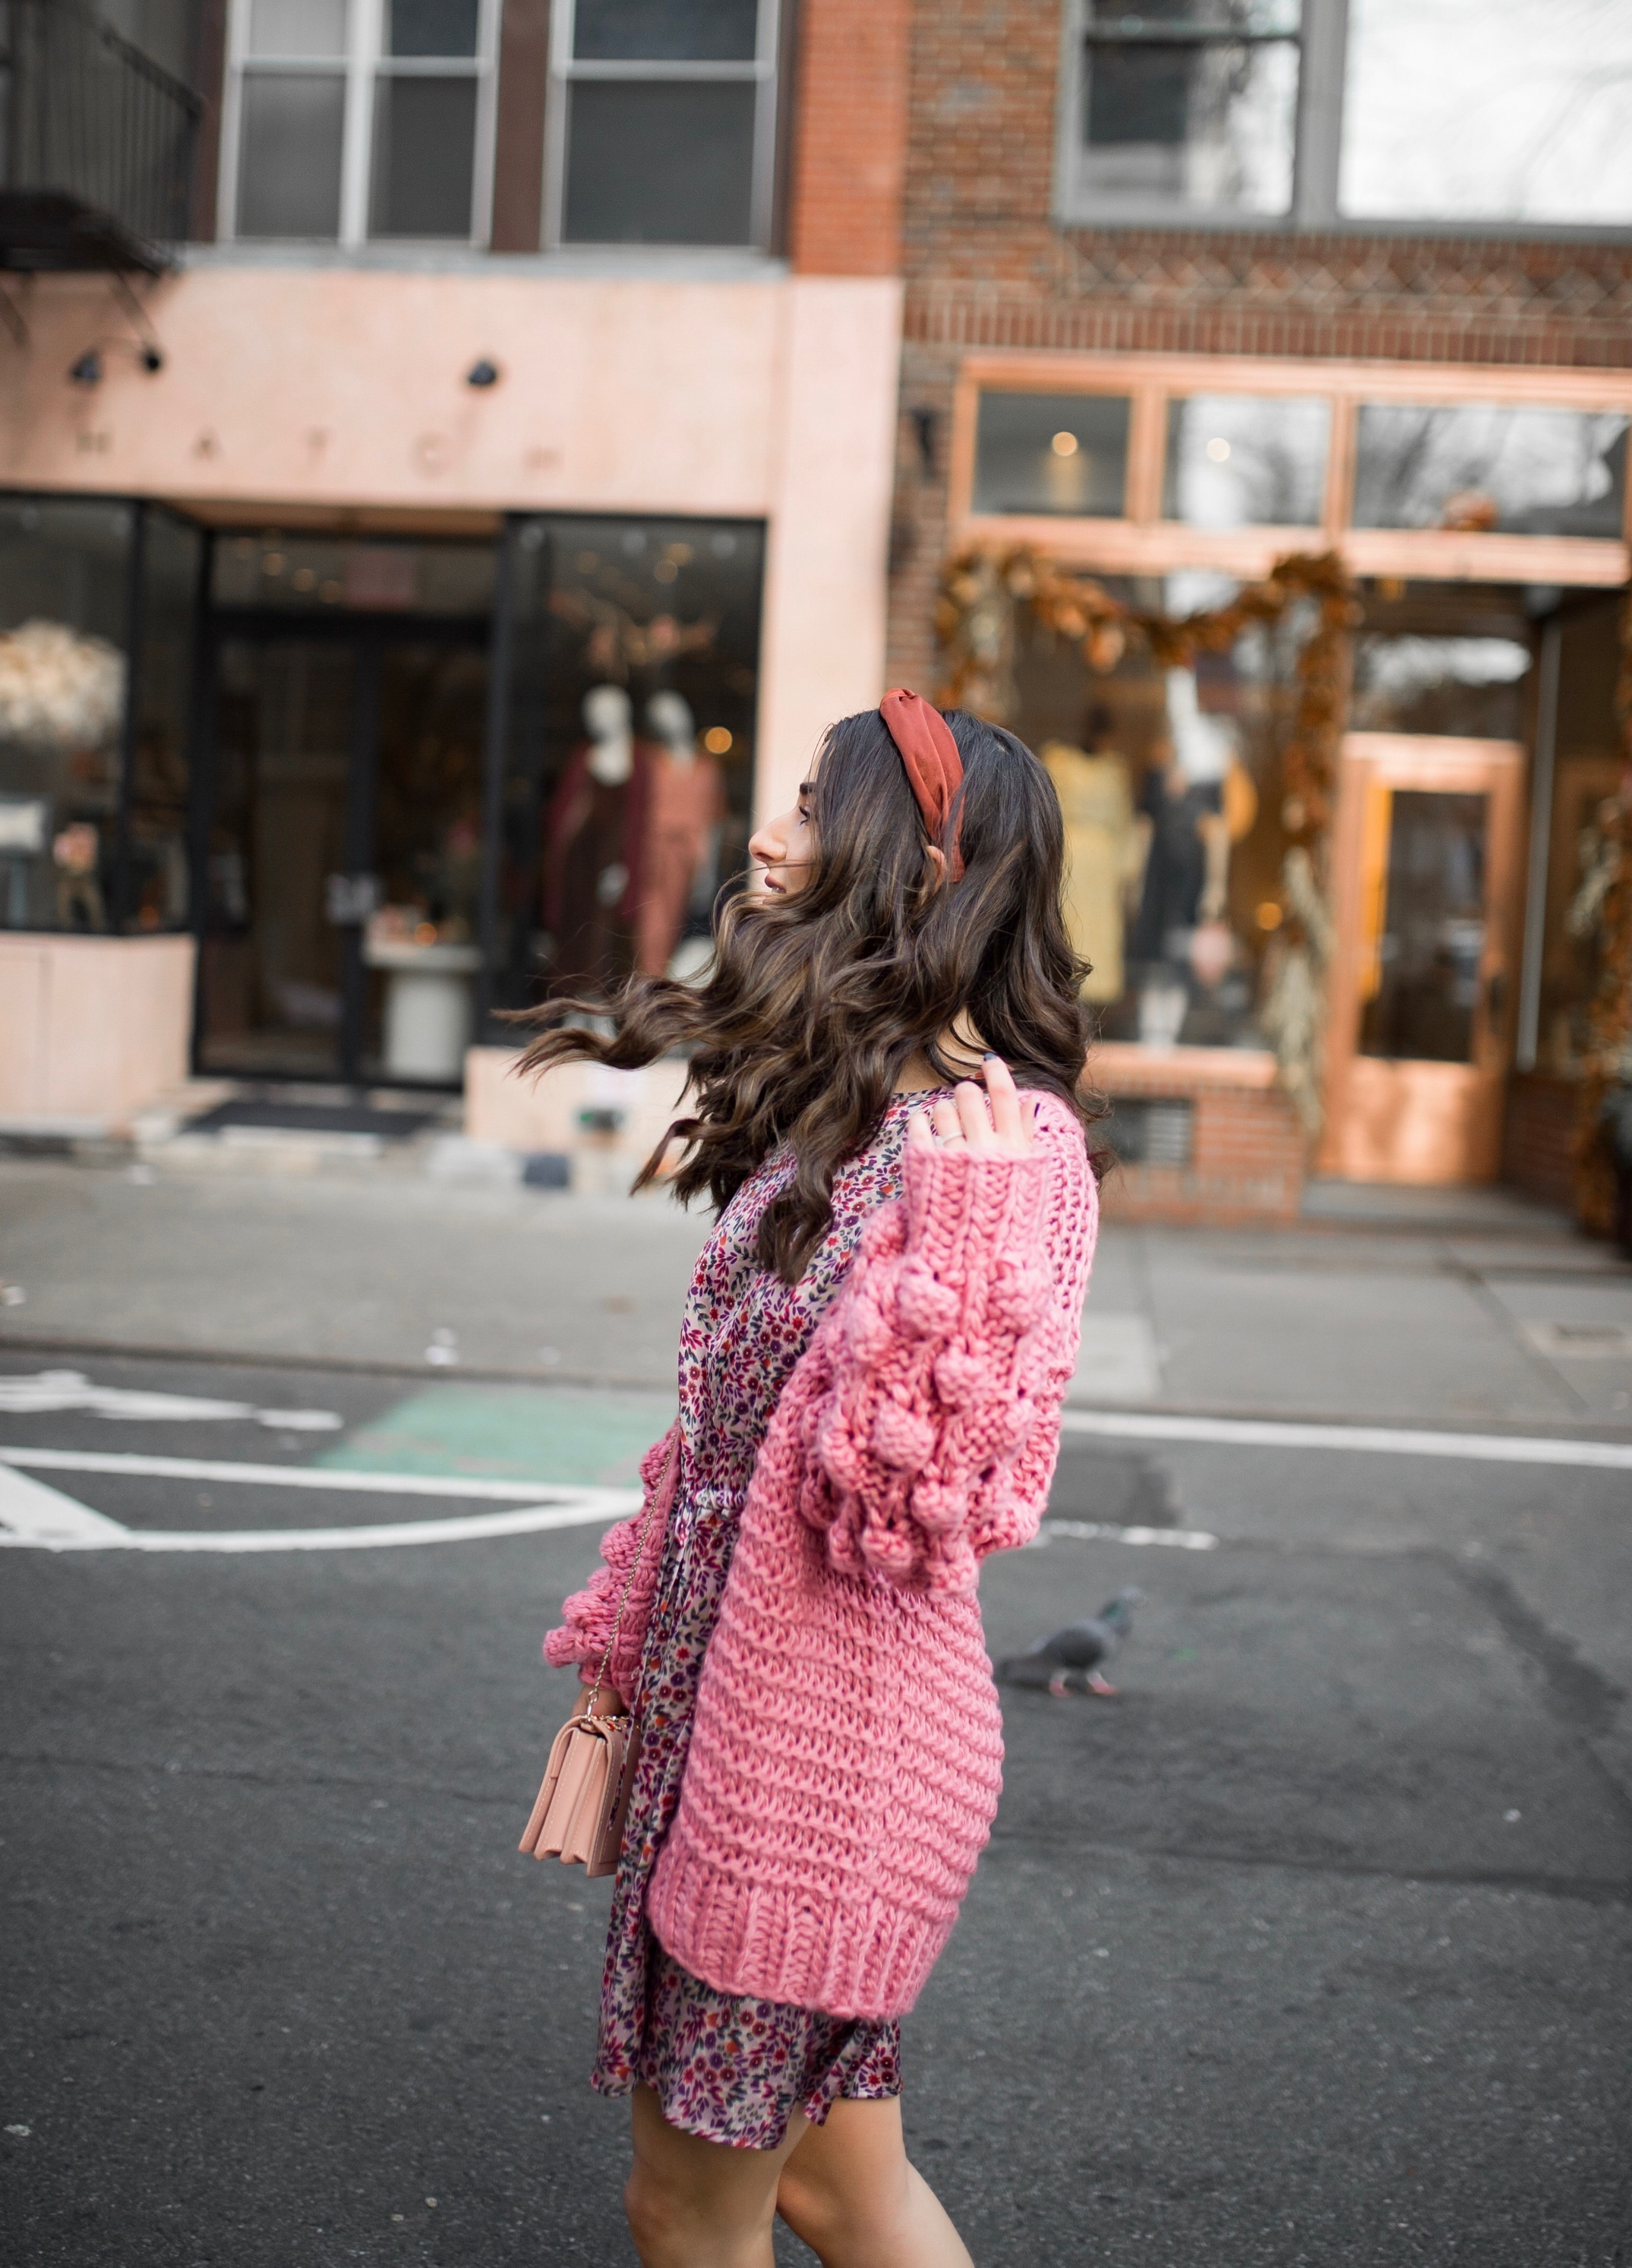 How Being In A Miserable Job Shaped My Entire Career Silk Floral Dress + Pink Pom Pom Sweater Esther Santer Fashion Blog NYC Street Style Blogger Outfit OOTD Trendy Shopping Mango Sale Winter How To Wear Maroon Velvet Booties Zac  Posen Swarovski Bag.jpg